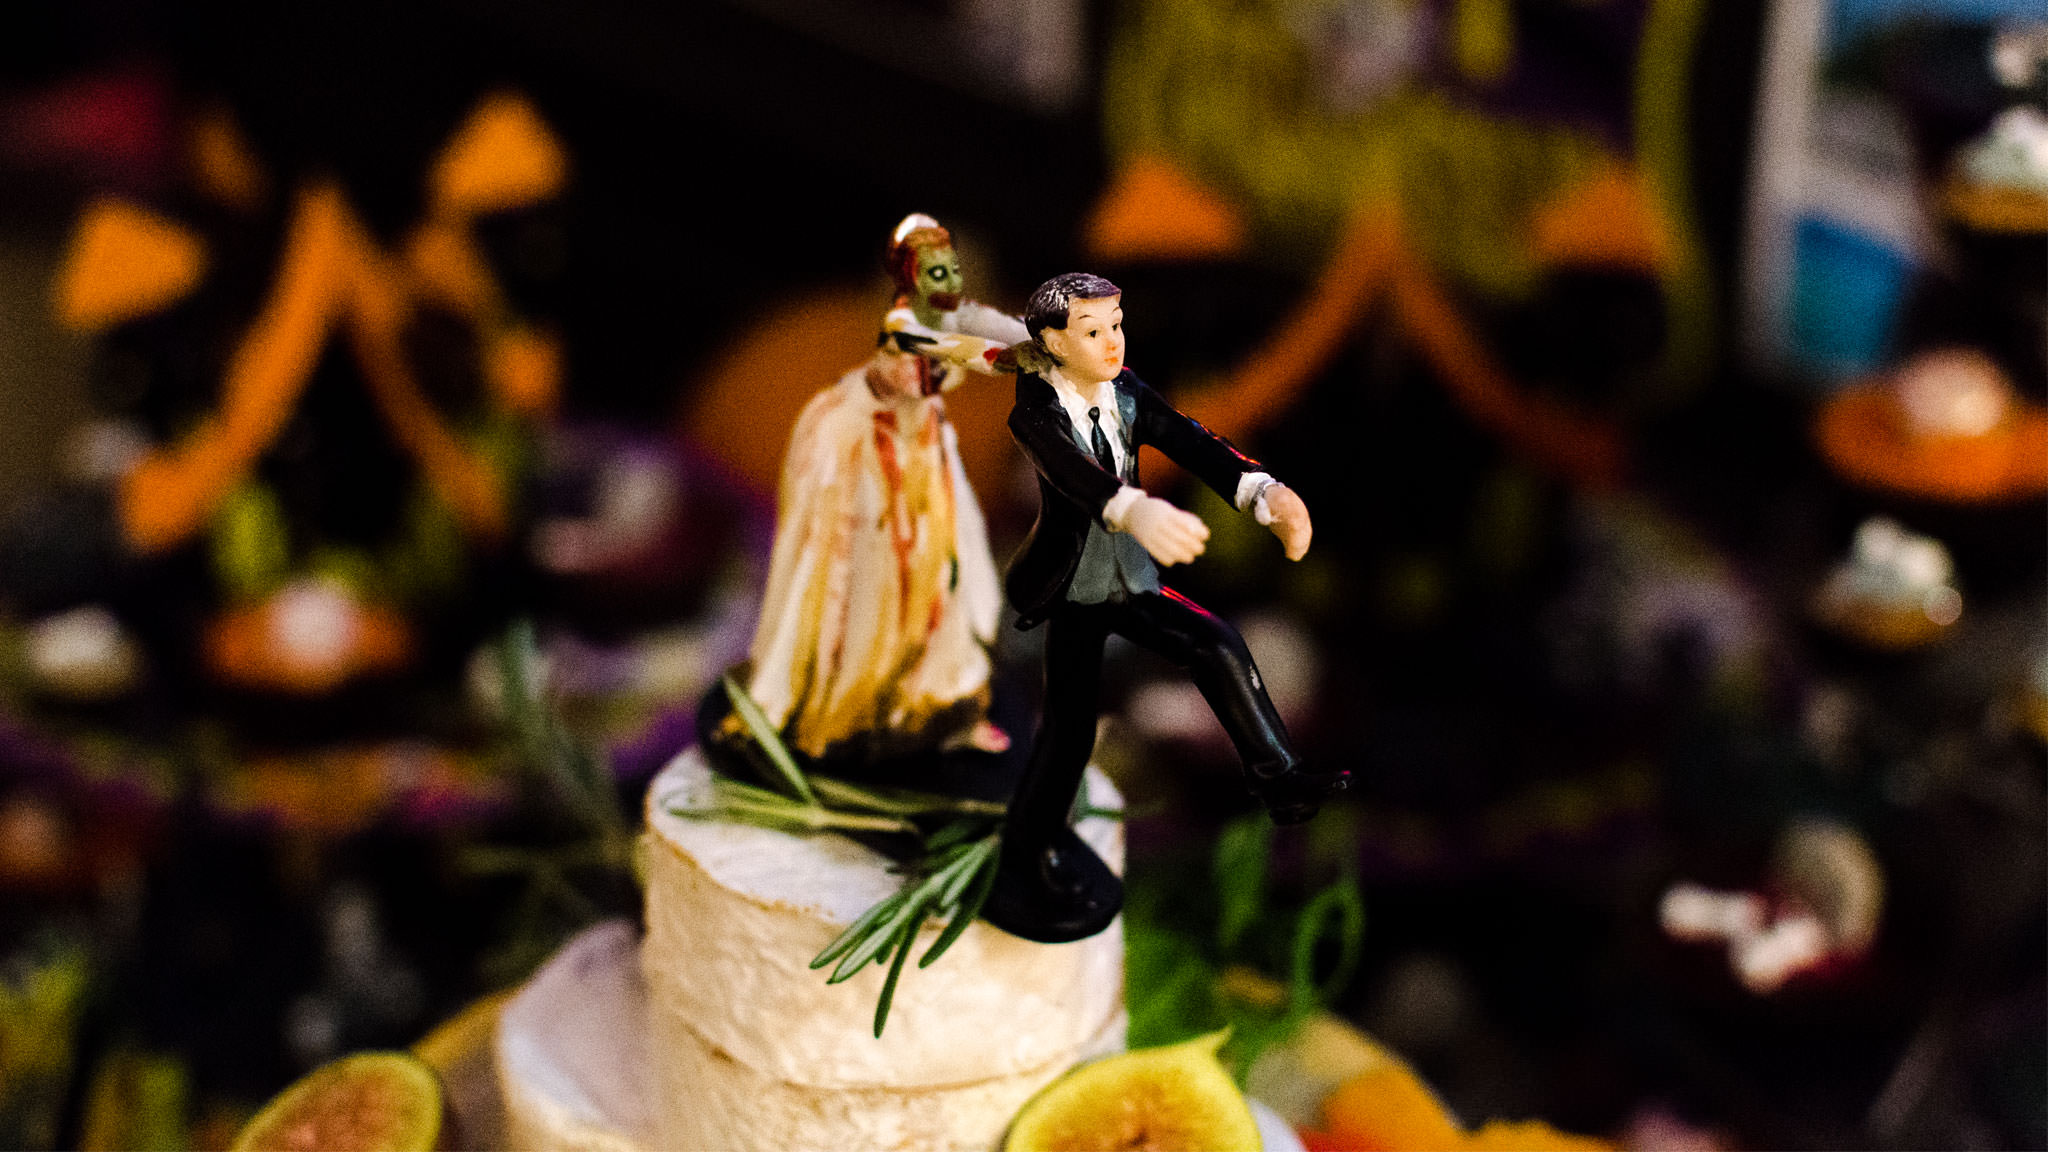 Cheese Cake Topper